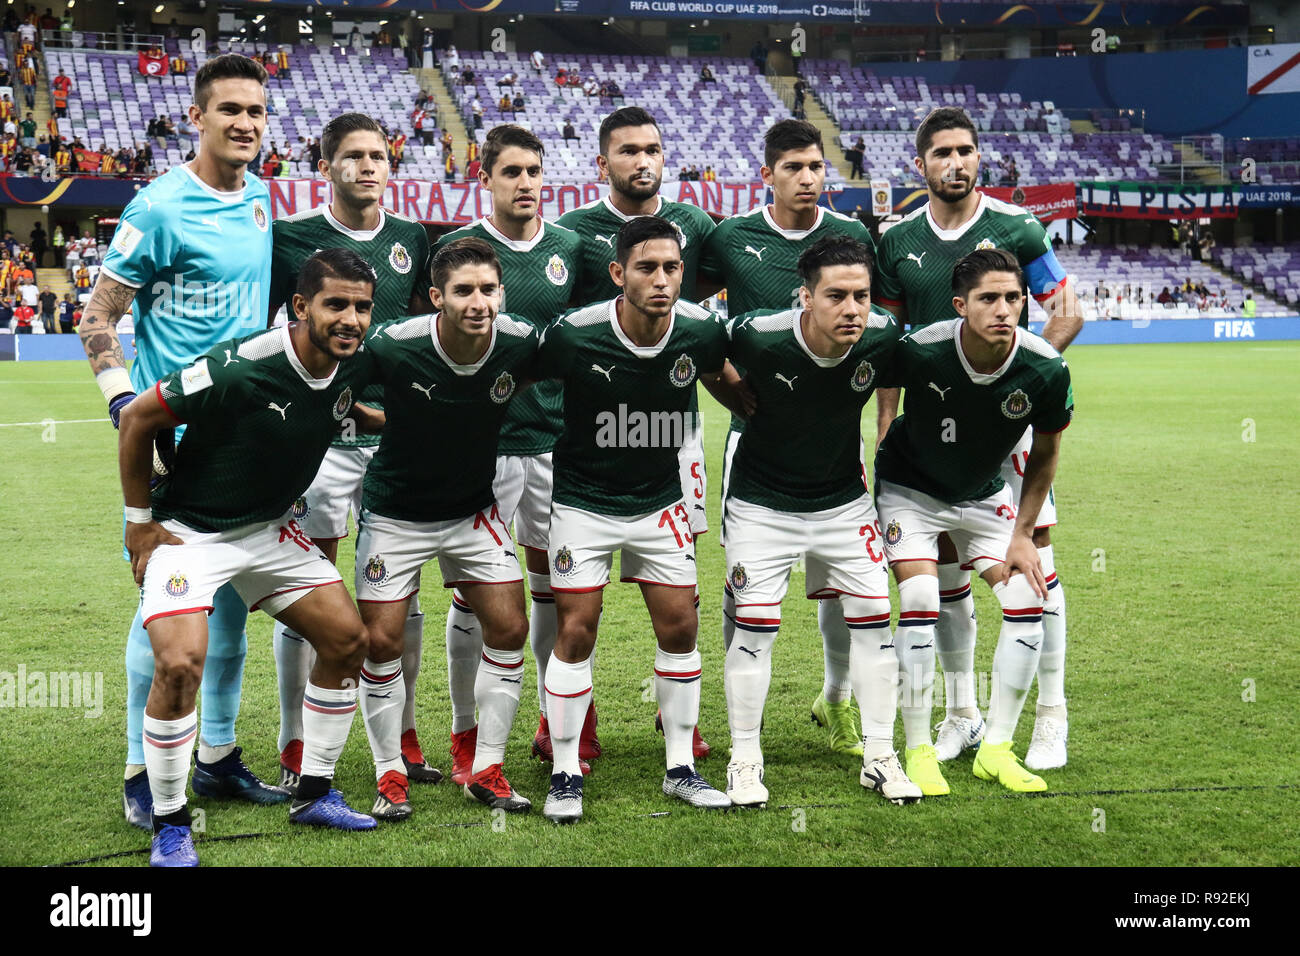 Al Ain, United Arab Emirates. 18th Dec, 2018. CD Guadalajara players line up proir to the start of the FIFA Club World Cup fifth place soccer match between ES Tunis and CD Guadalajara at Hazza Bin Zayed Stadium. Credit: Mohamed Flis/dpa/Alamy Live News Stock Photo